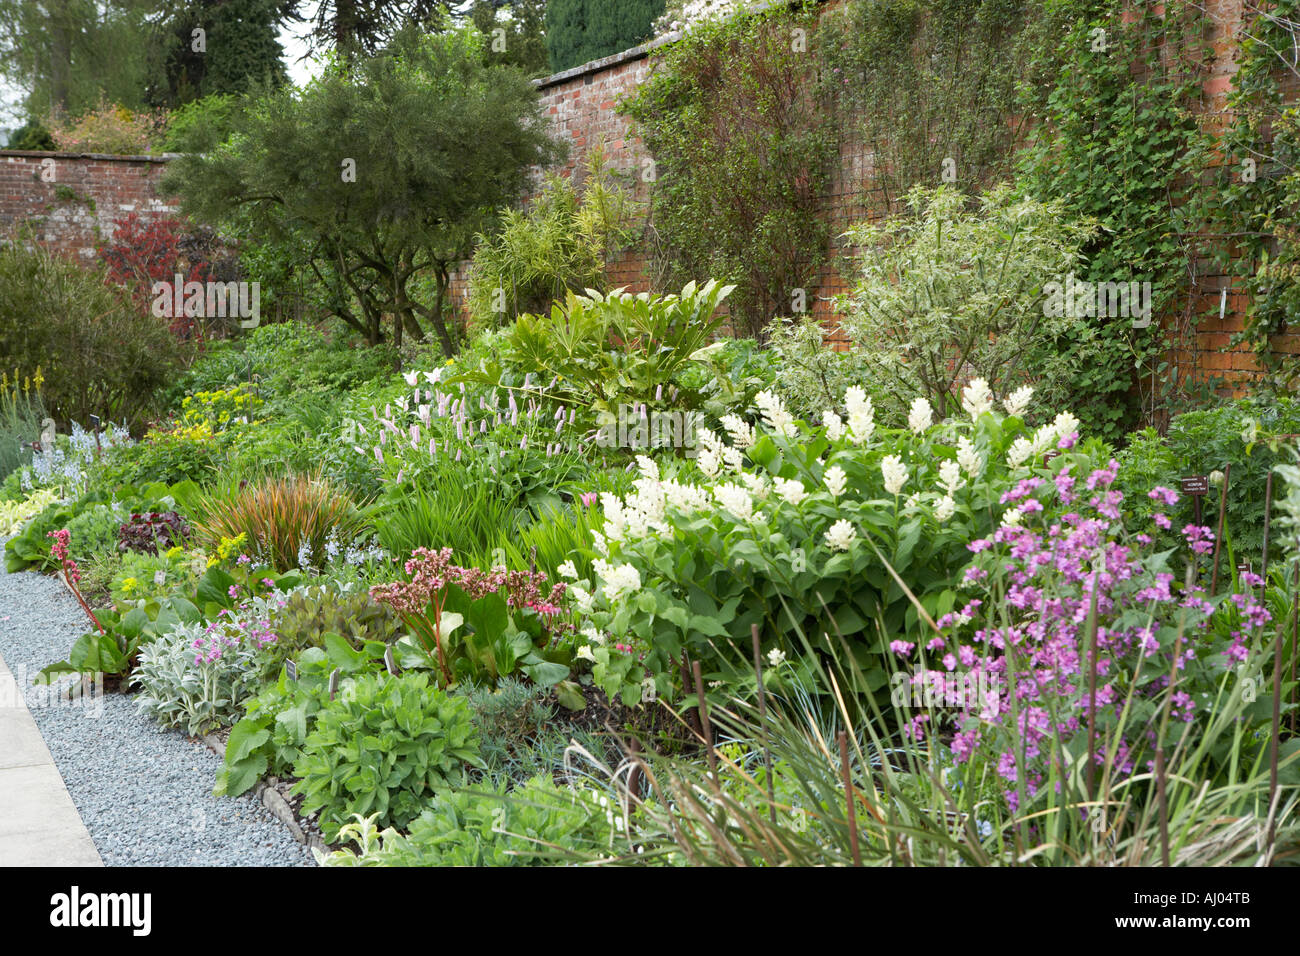 Holehird garden large bed with the white flowering shrub Smilacina racemosa in foreground Stock Photo